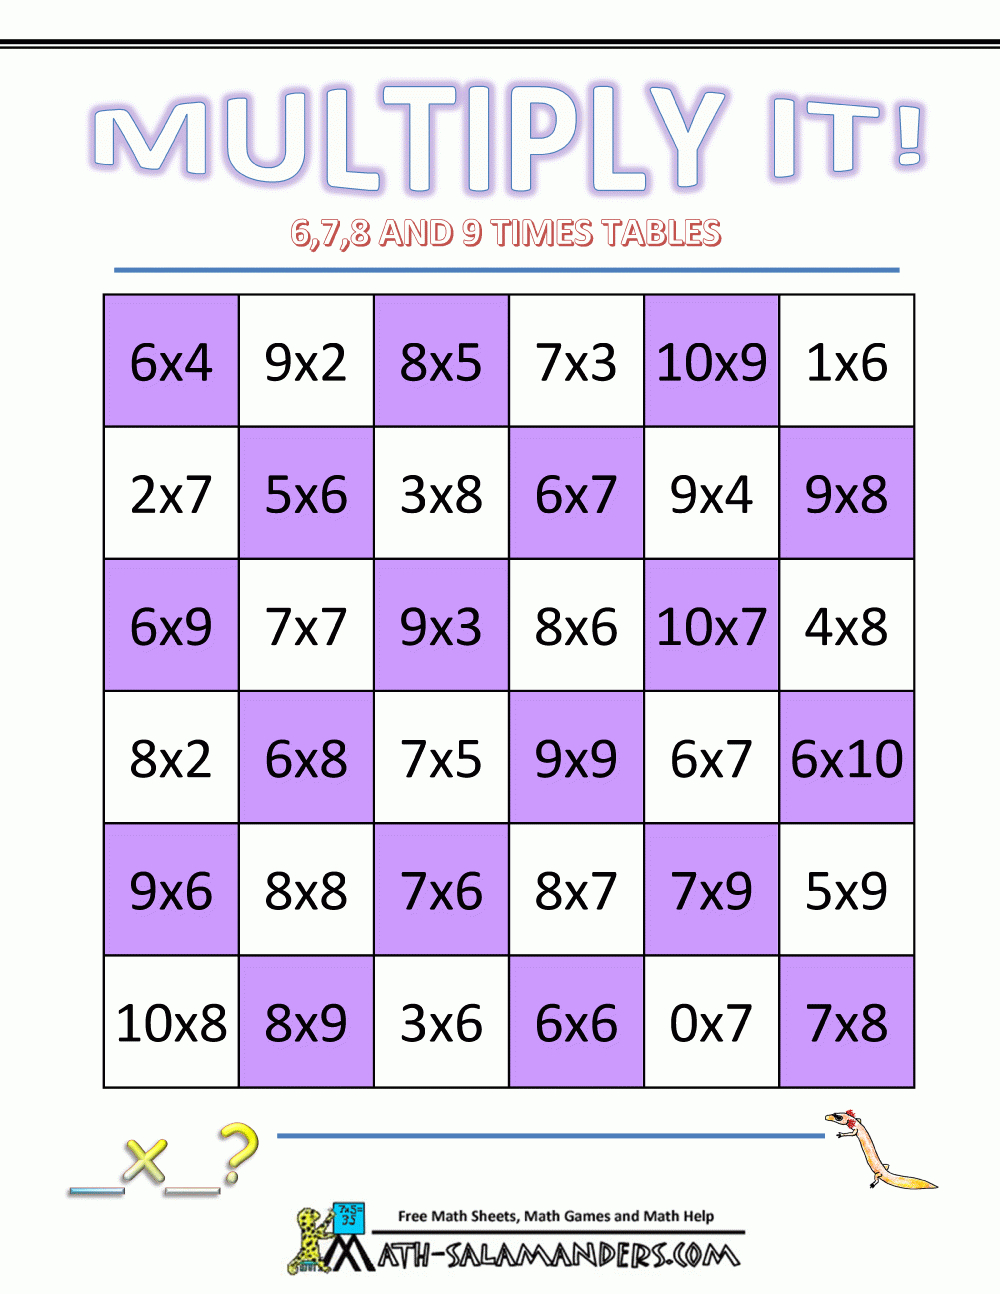 learn multiplication tables games